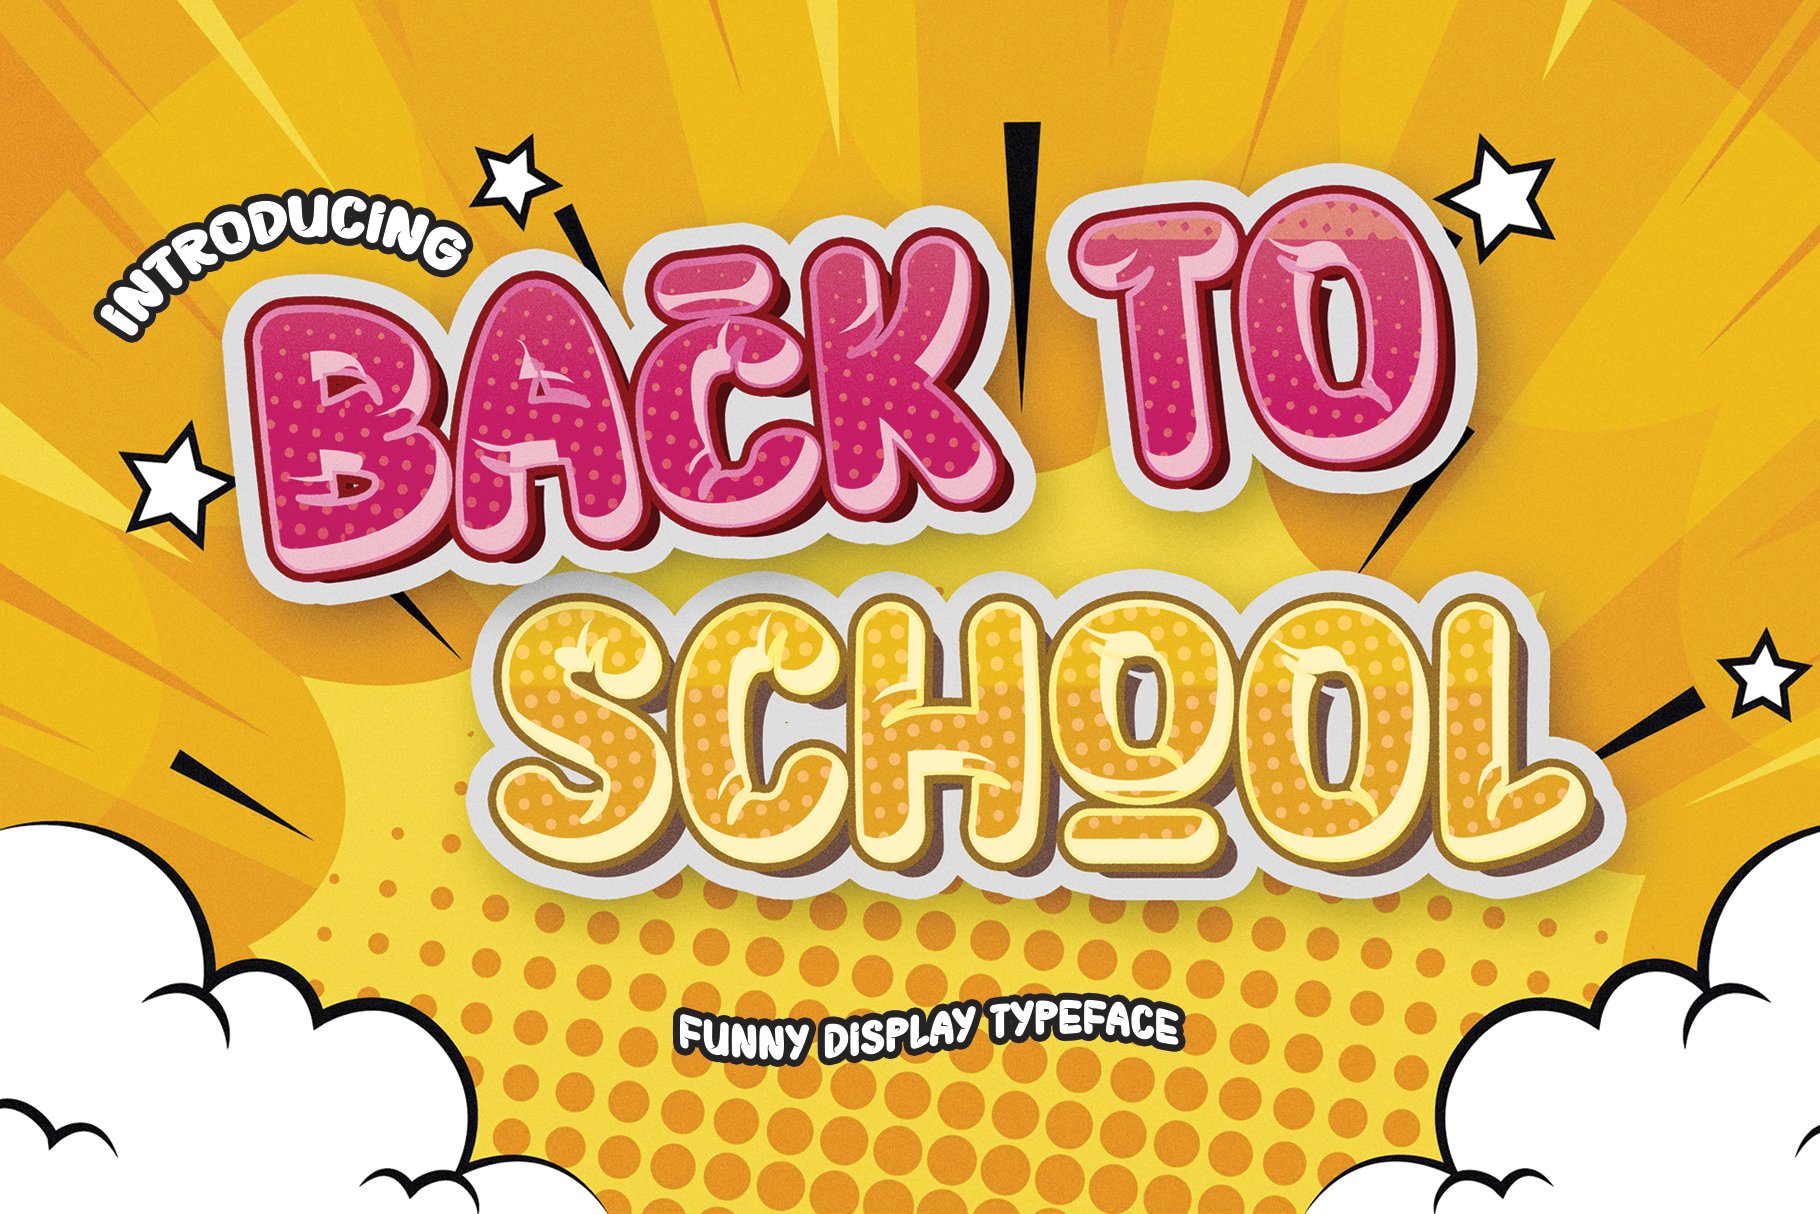 Back To School | Funny Display Font cover image.